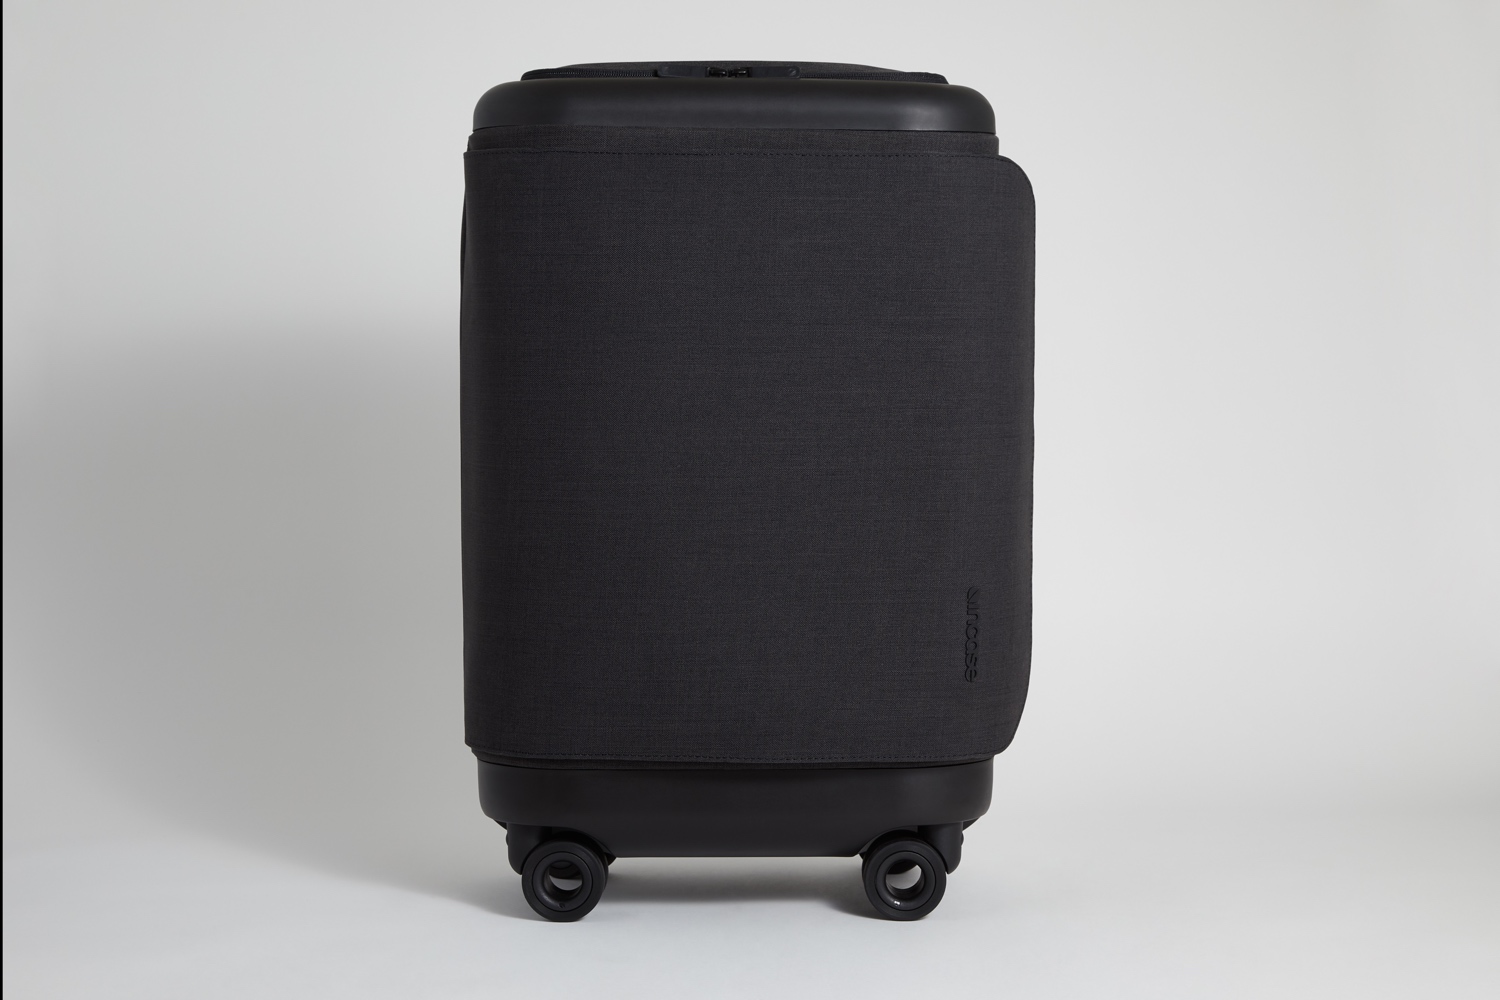 incase proconnected 4 wheel hubless roller smart luggage blends high design with large capacity battery studio0379